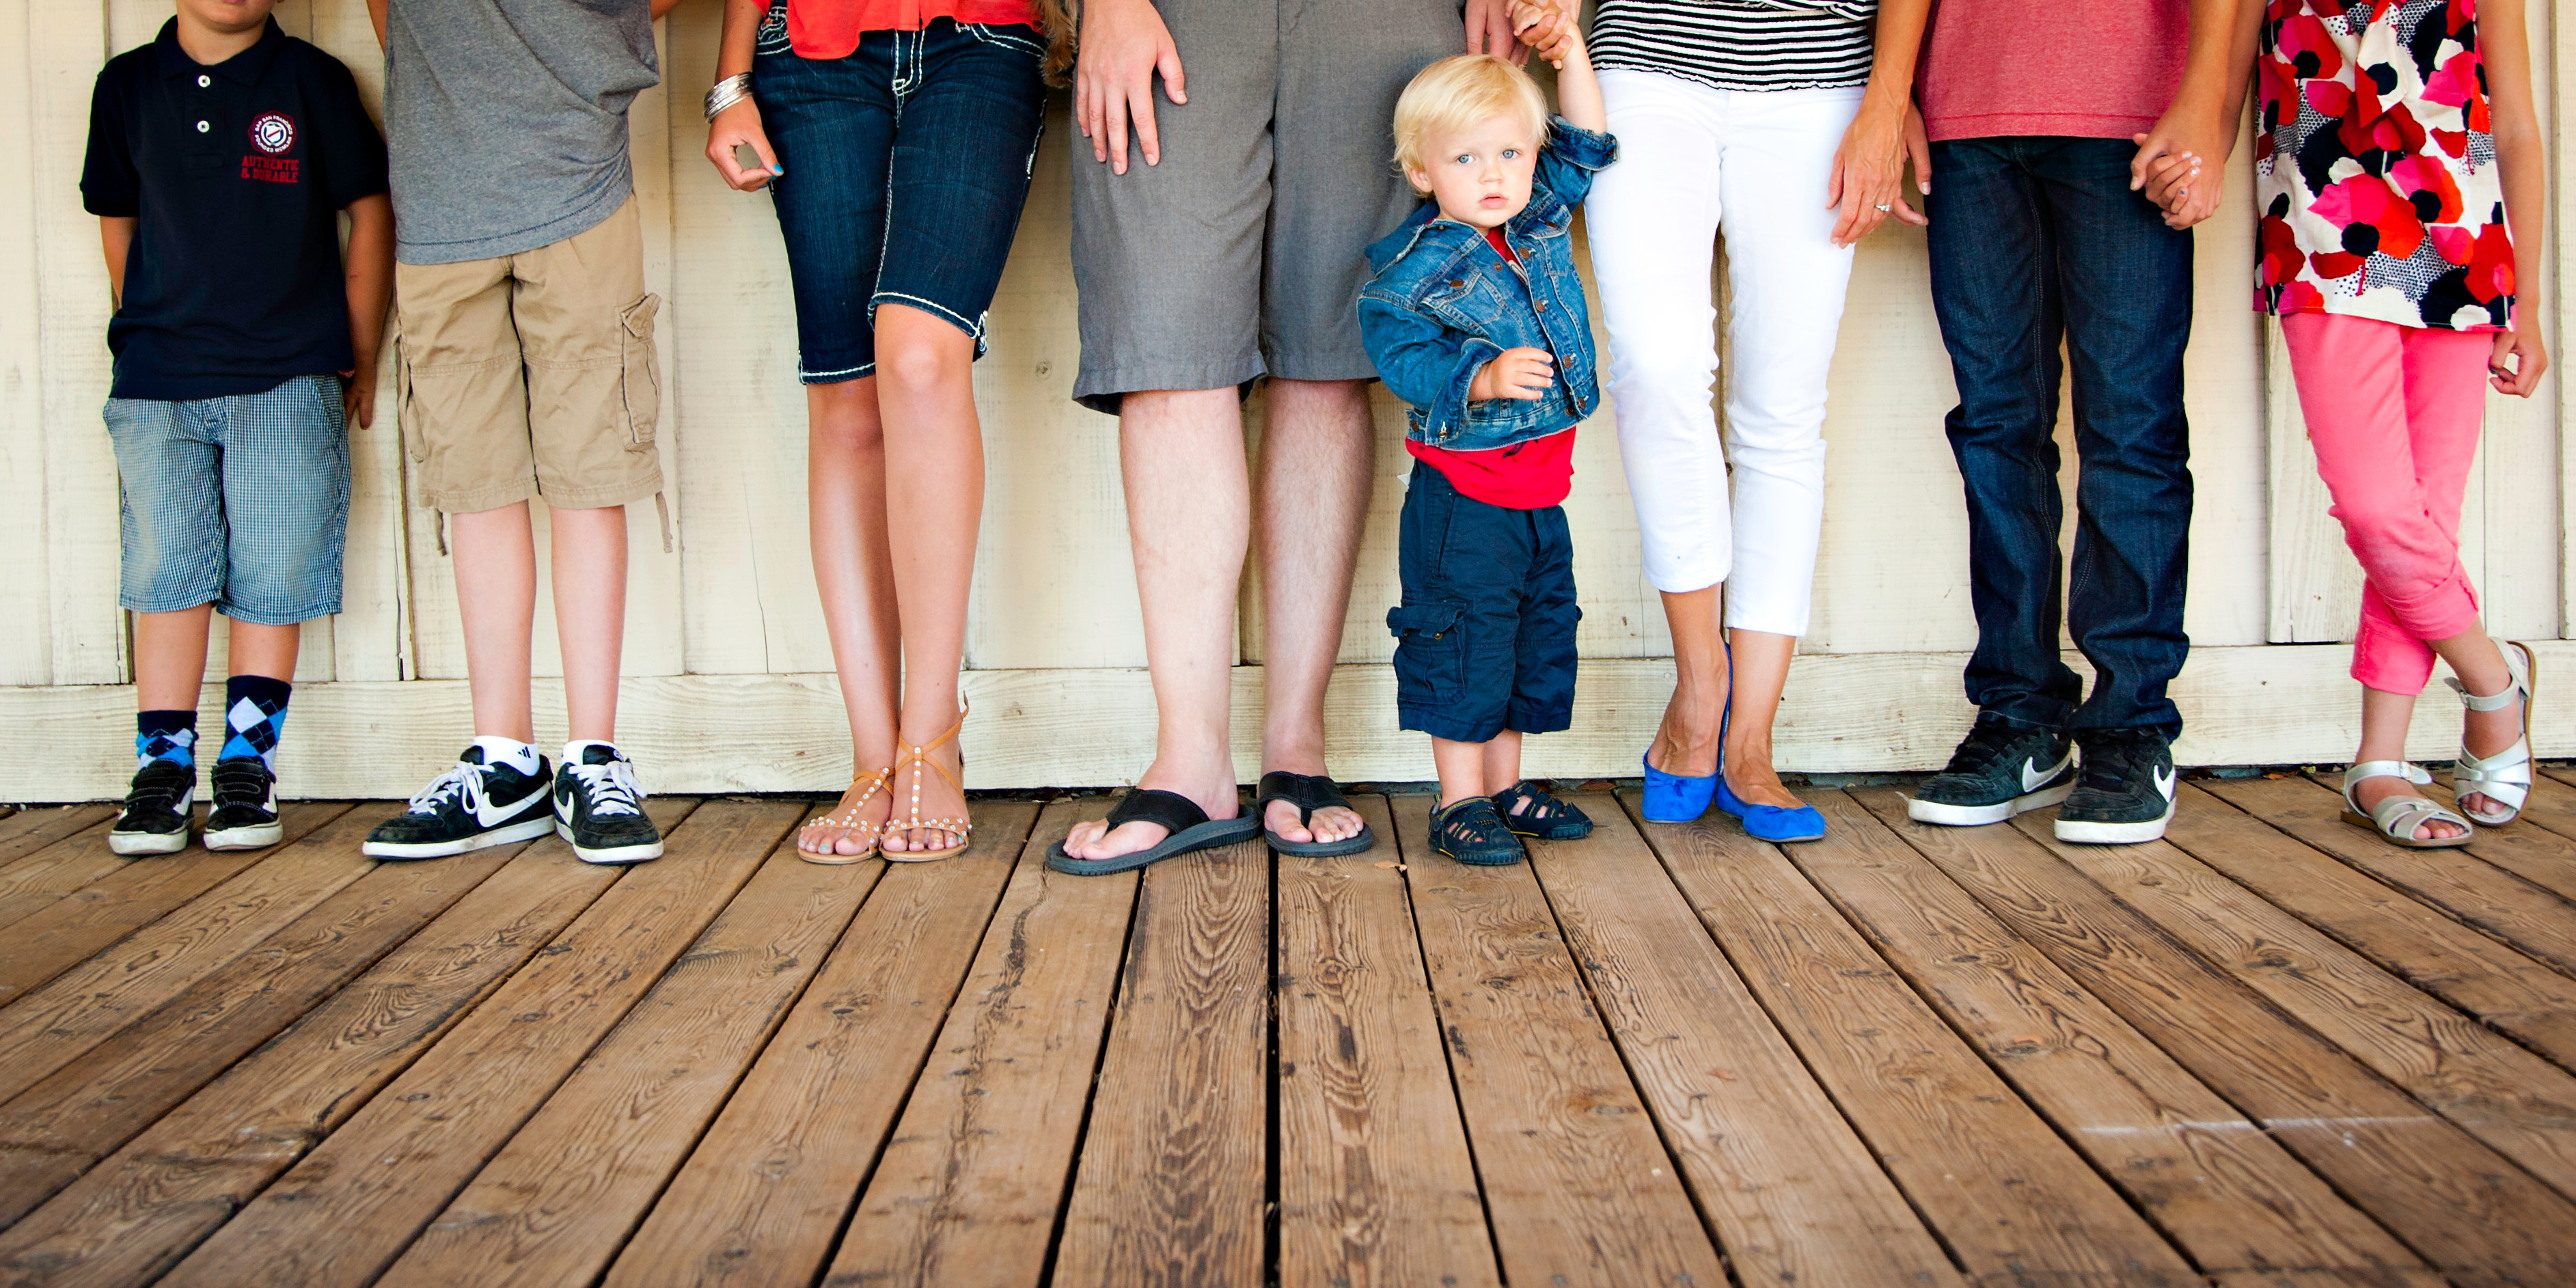 A cropped image of a group photo showing only legs and feet.